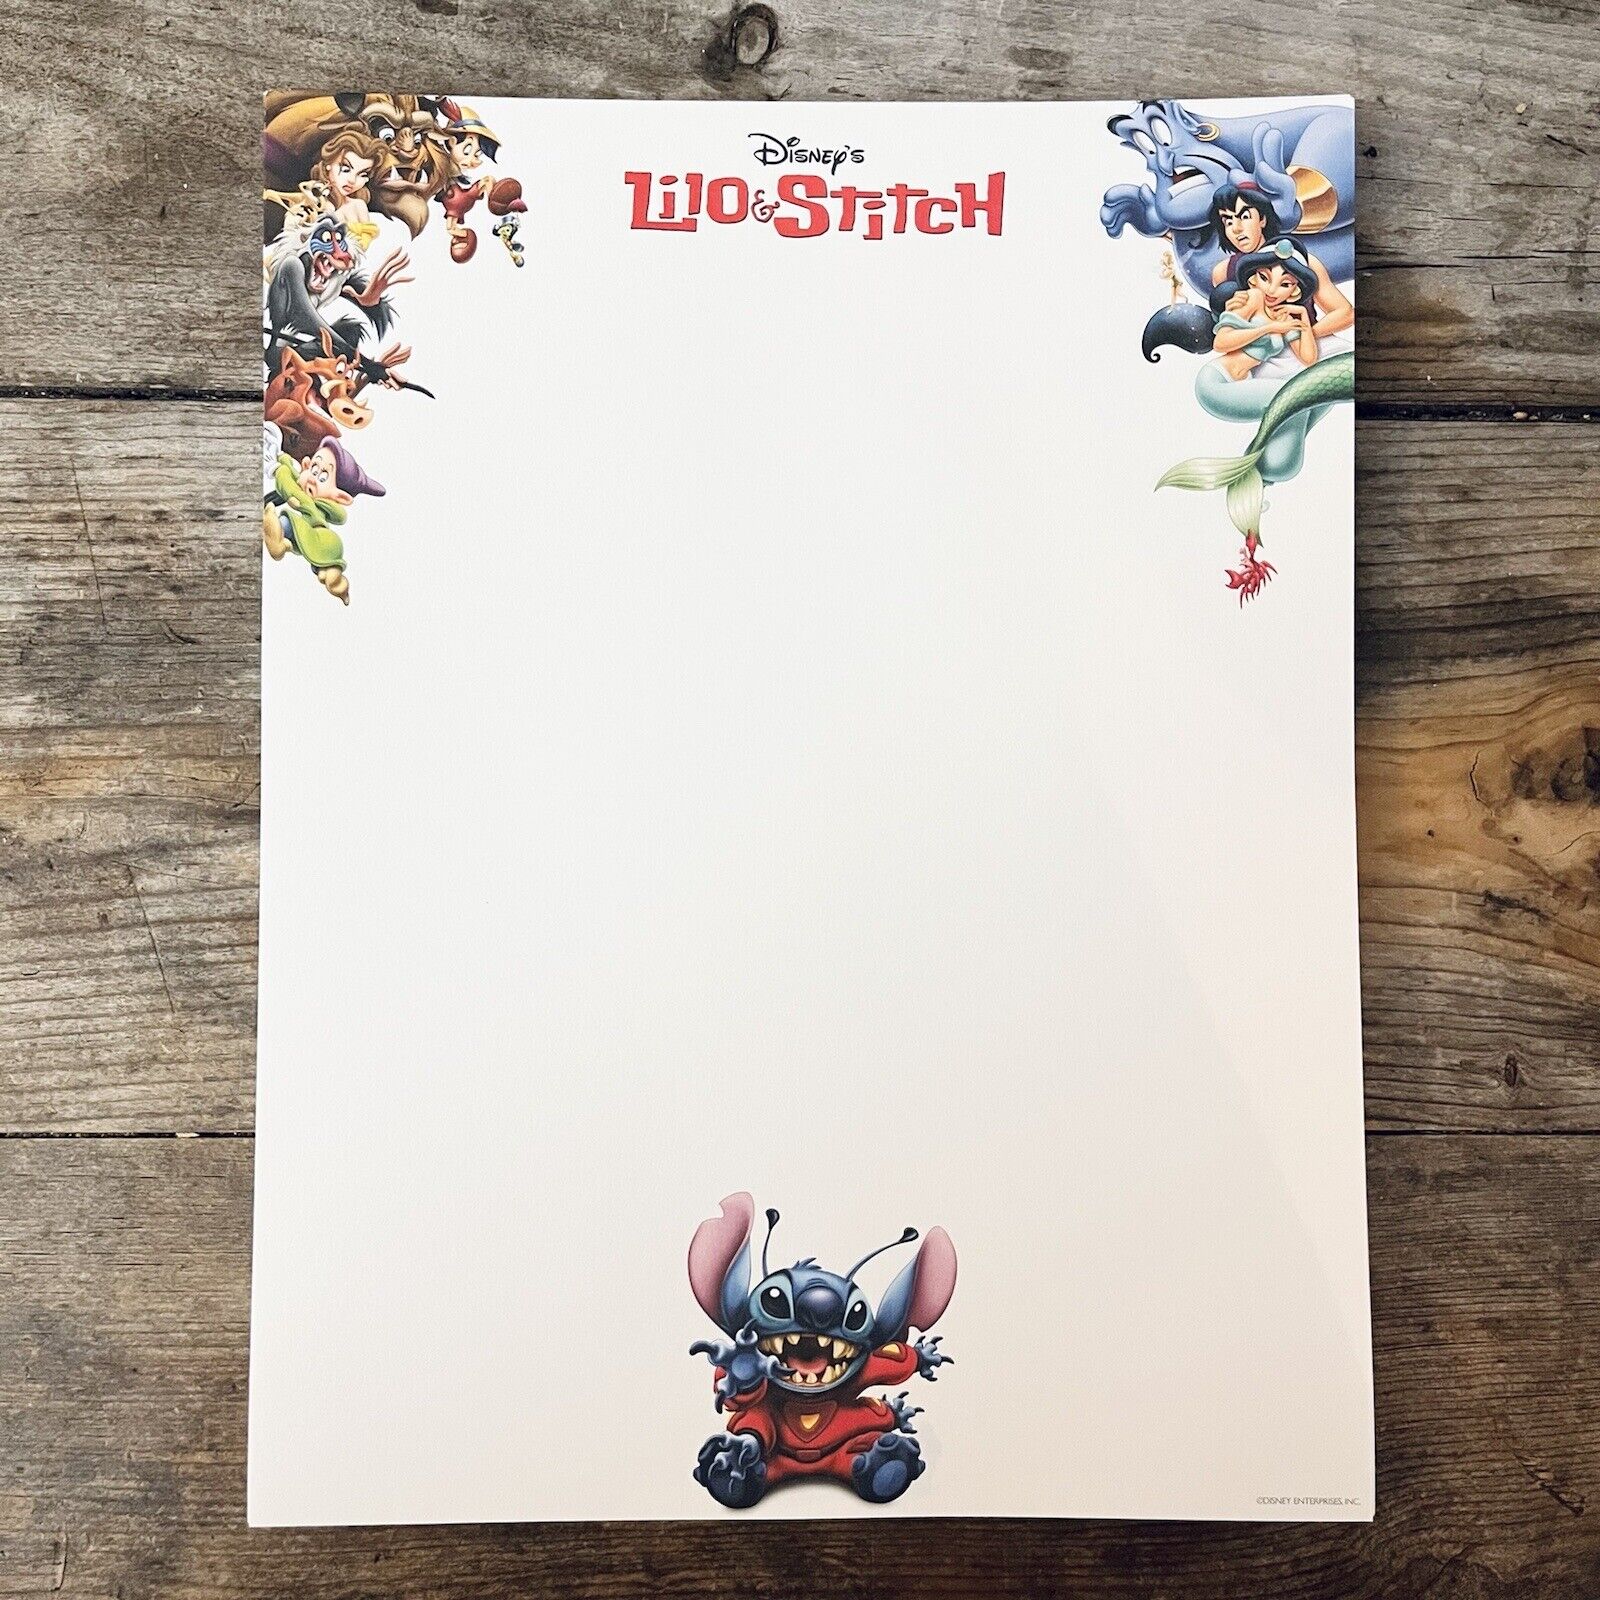 VTG Lilo & Stitch official Disney Letterhead Stationary - 1 Sheet - 75 Available